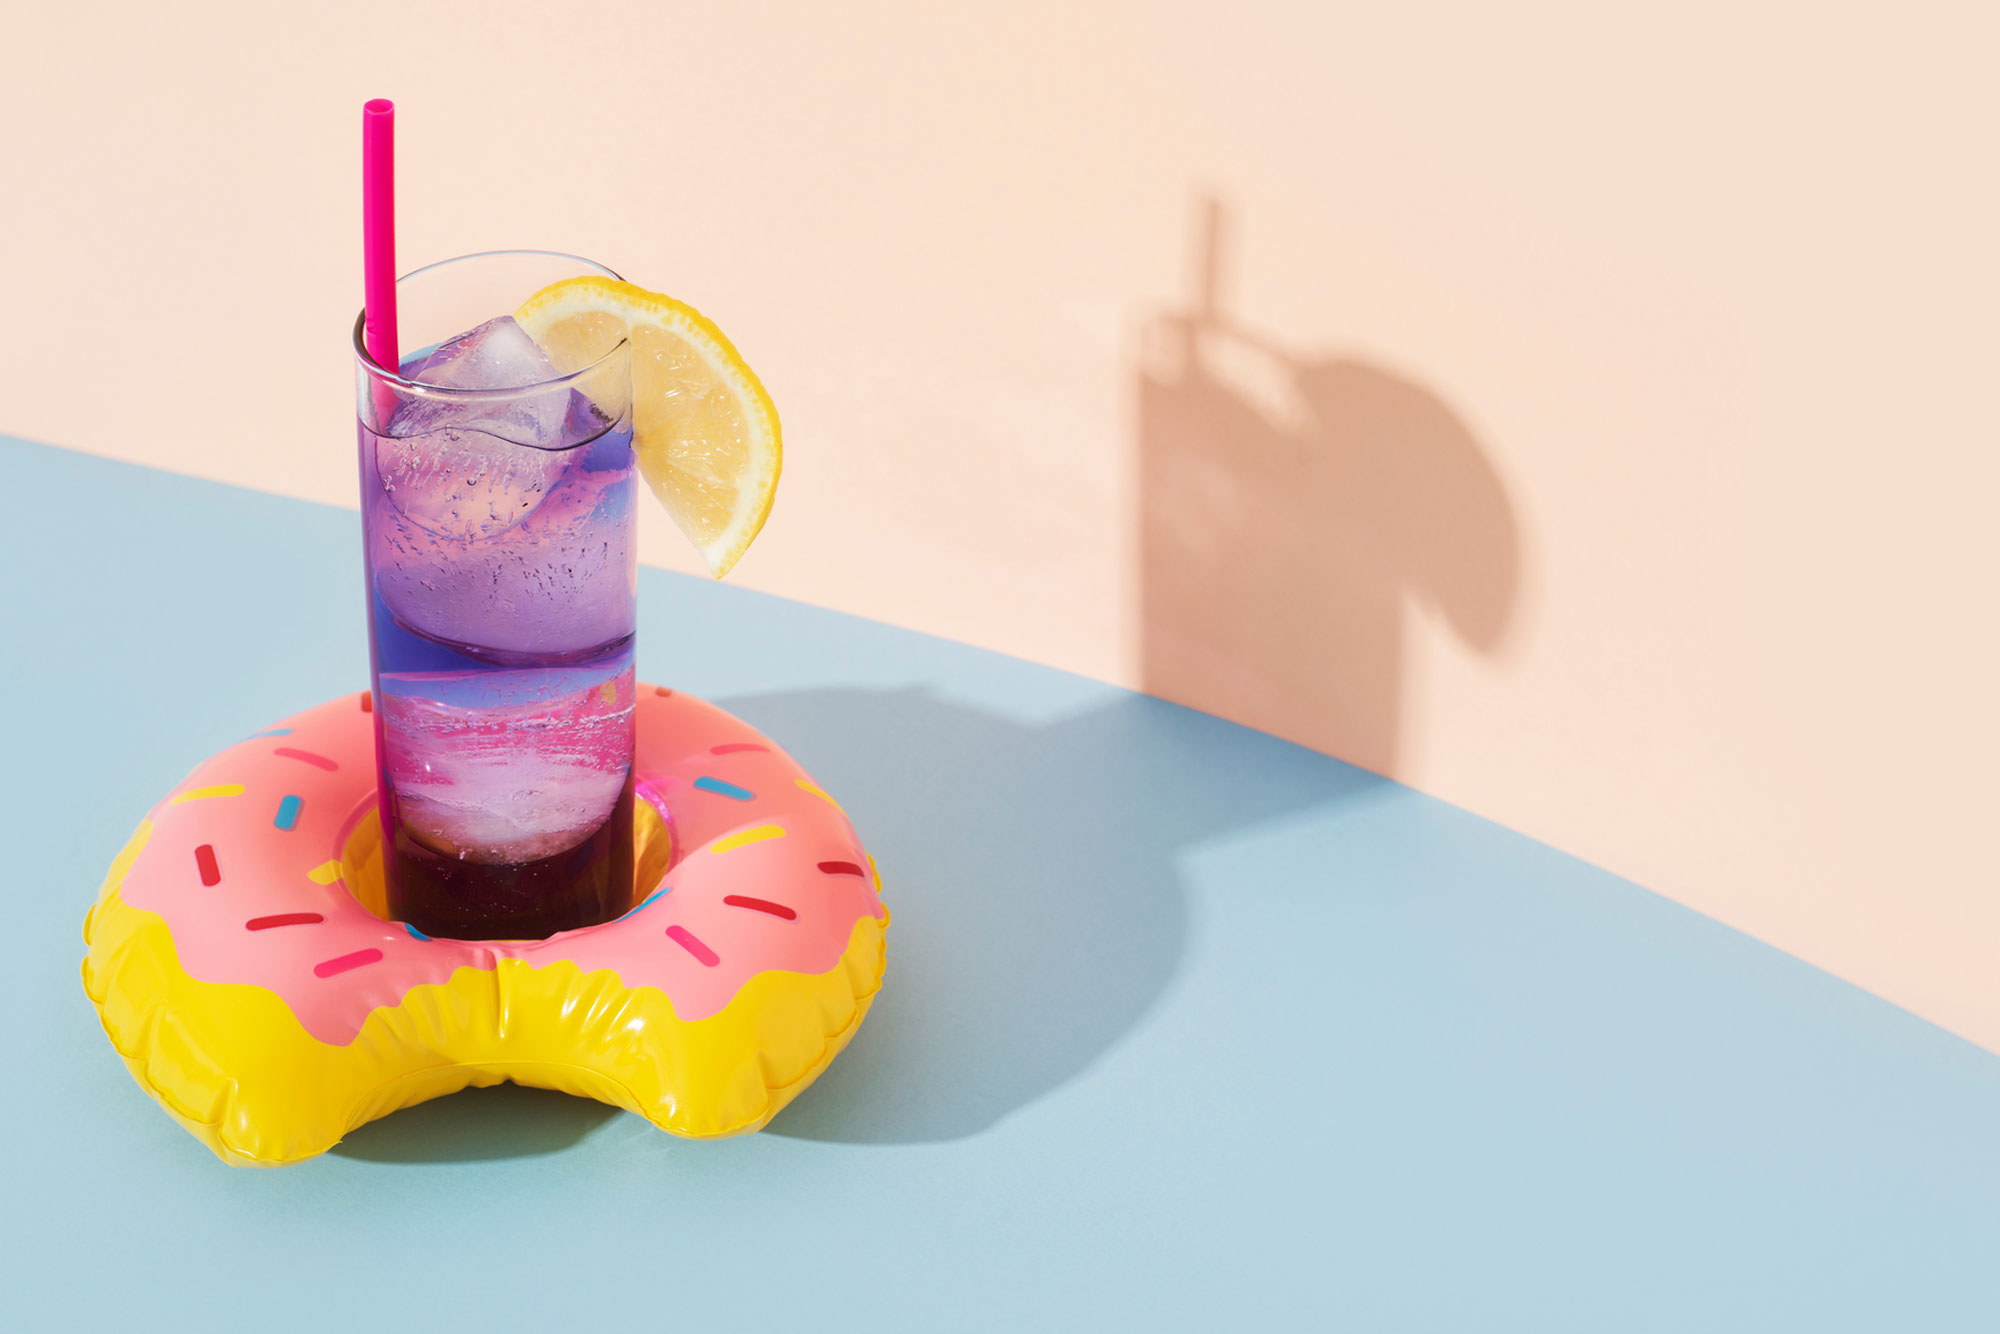 Swim ring in the shape of a donut with a cocktail